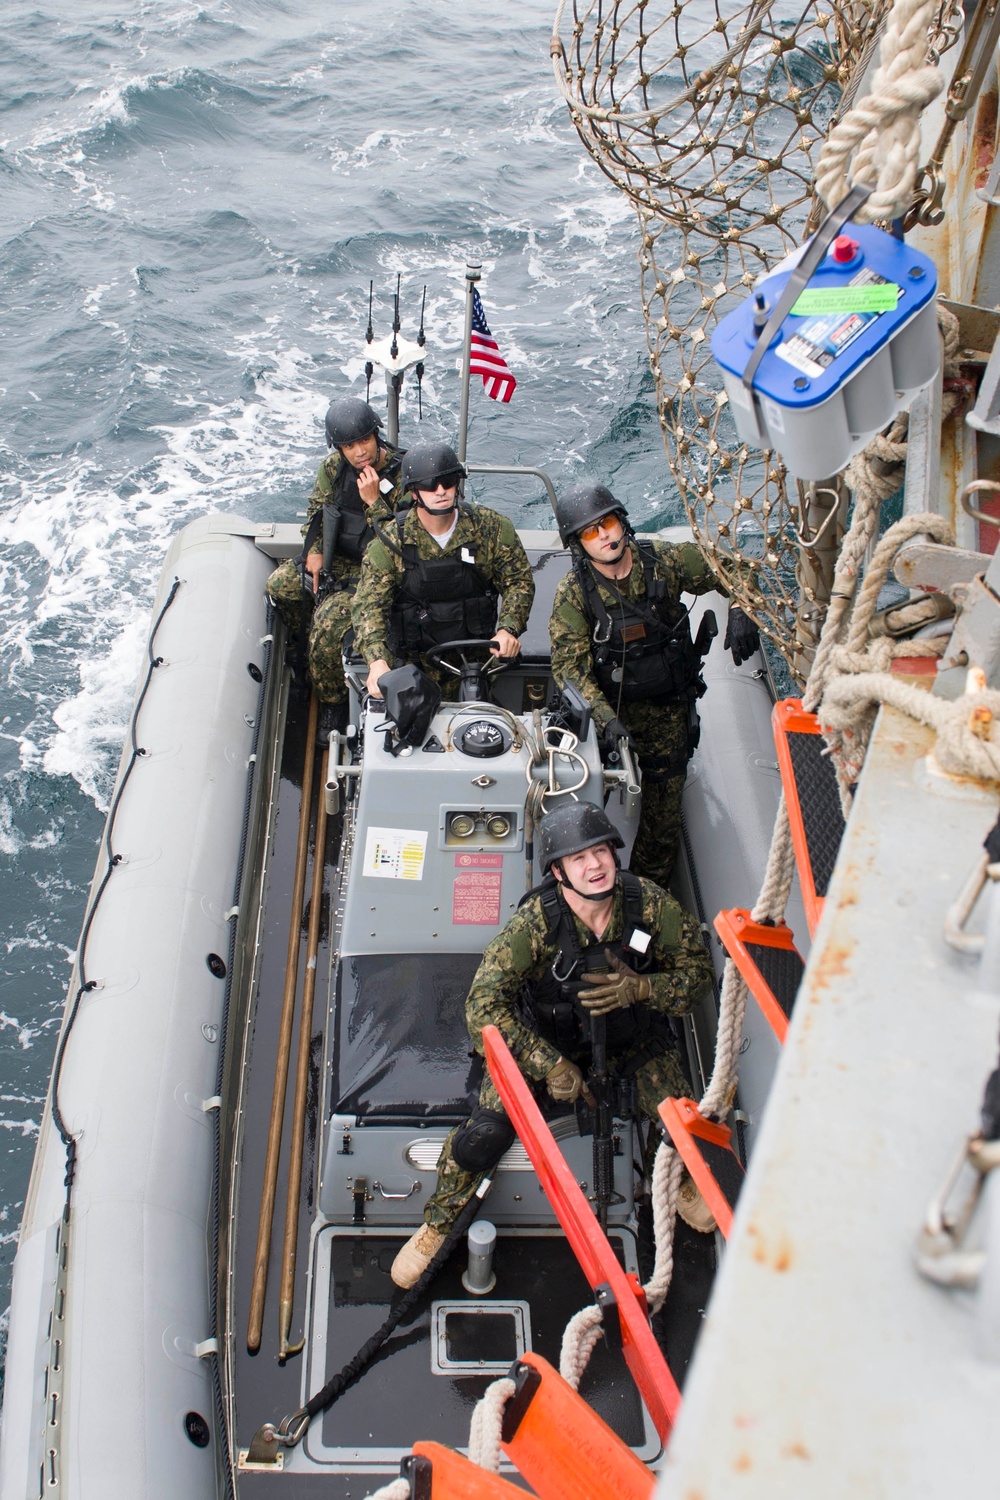 Cole is deployed in the U.S. 5th Fleet area of operations in support of maritime security operations designed to reassure allies and partners, and to preserve the freedom of navigation and the free flow of commerce in the region